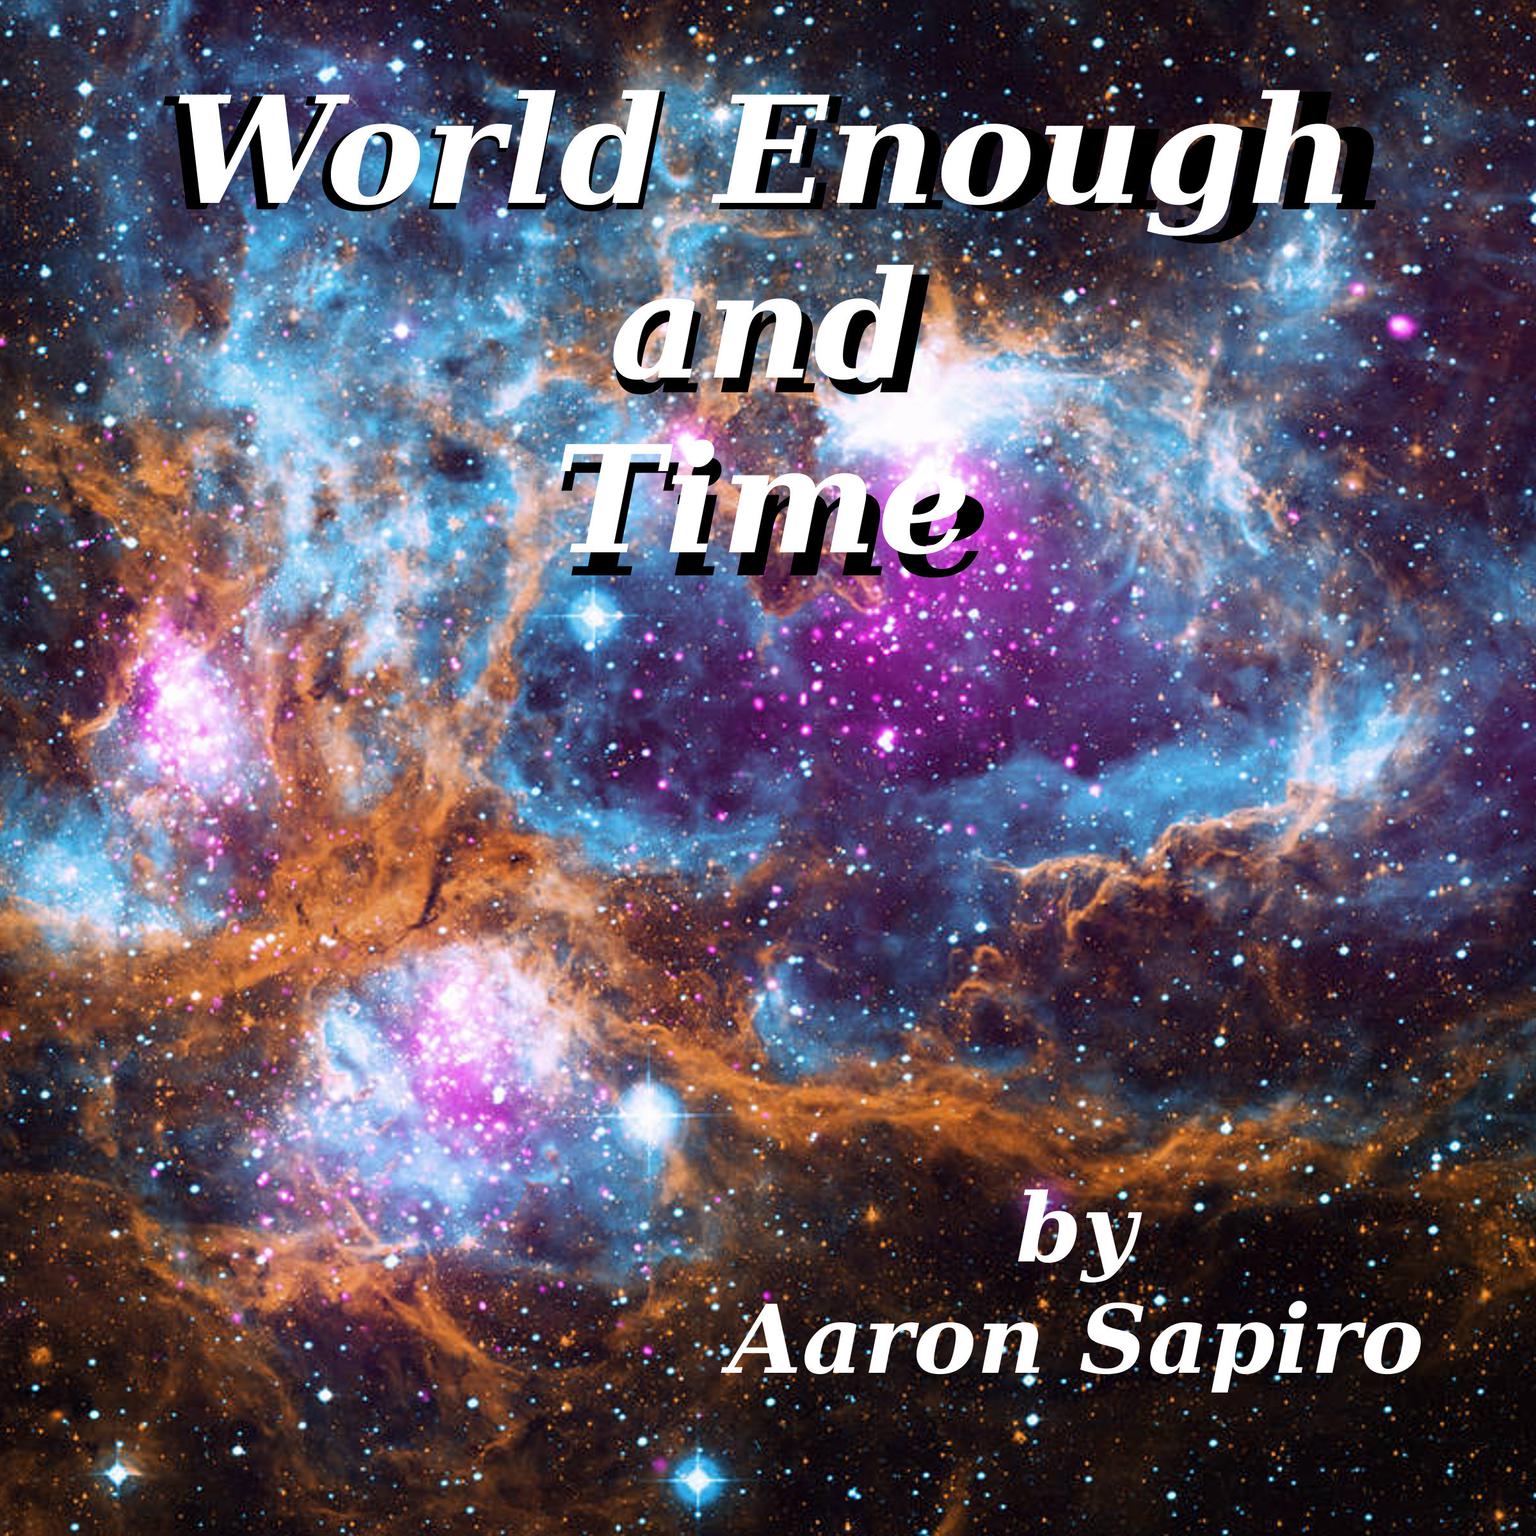 World Enough and Time Audiobook, by Aaron Sapiro